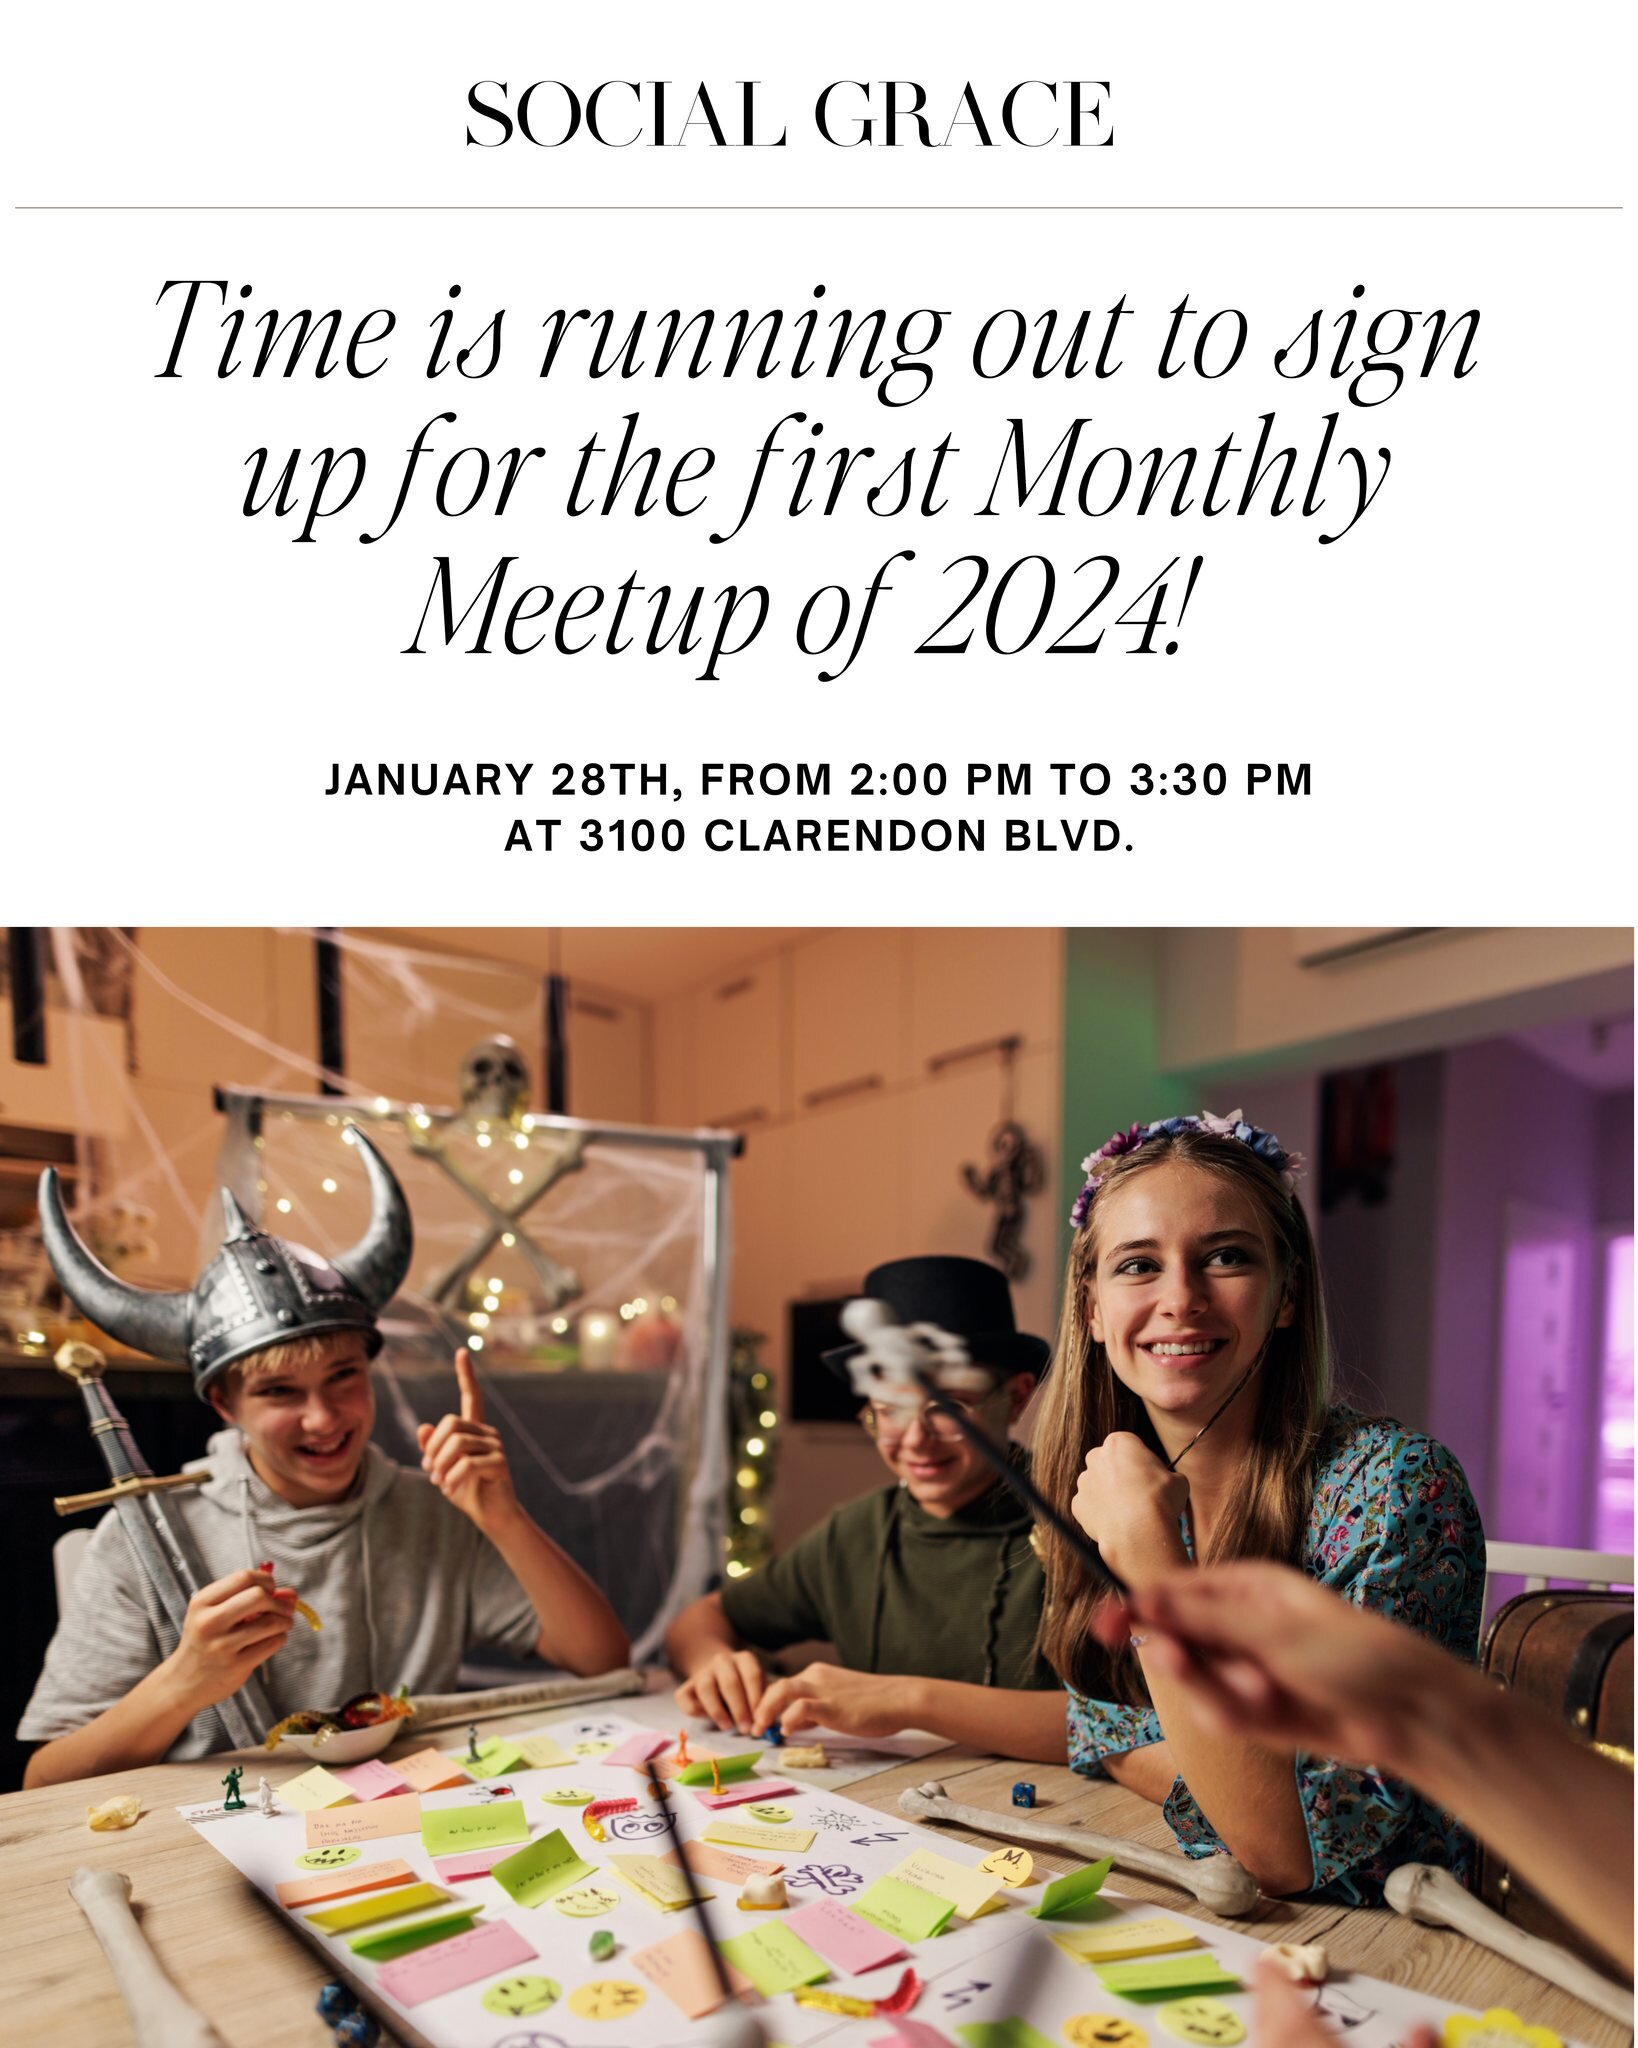 📢 REMINDER: Join us for the January Sunday Monthly Meetup! 🎉

Hey parents! 🌟 We're thrilled to invite your middle schooler or teen to our first Monthly Meetup of 2024! 🚀 Get ready for an incredible time filled with fun, food, games, and a special